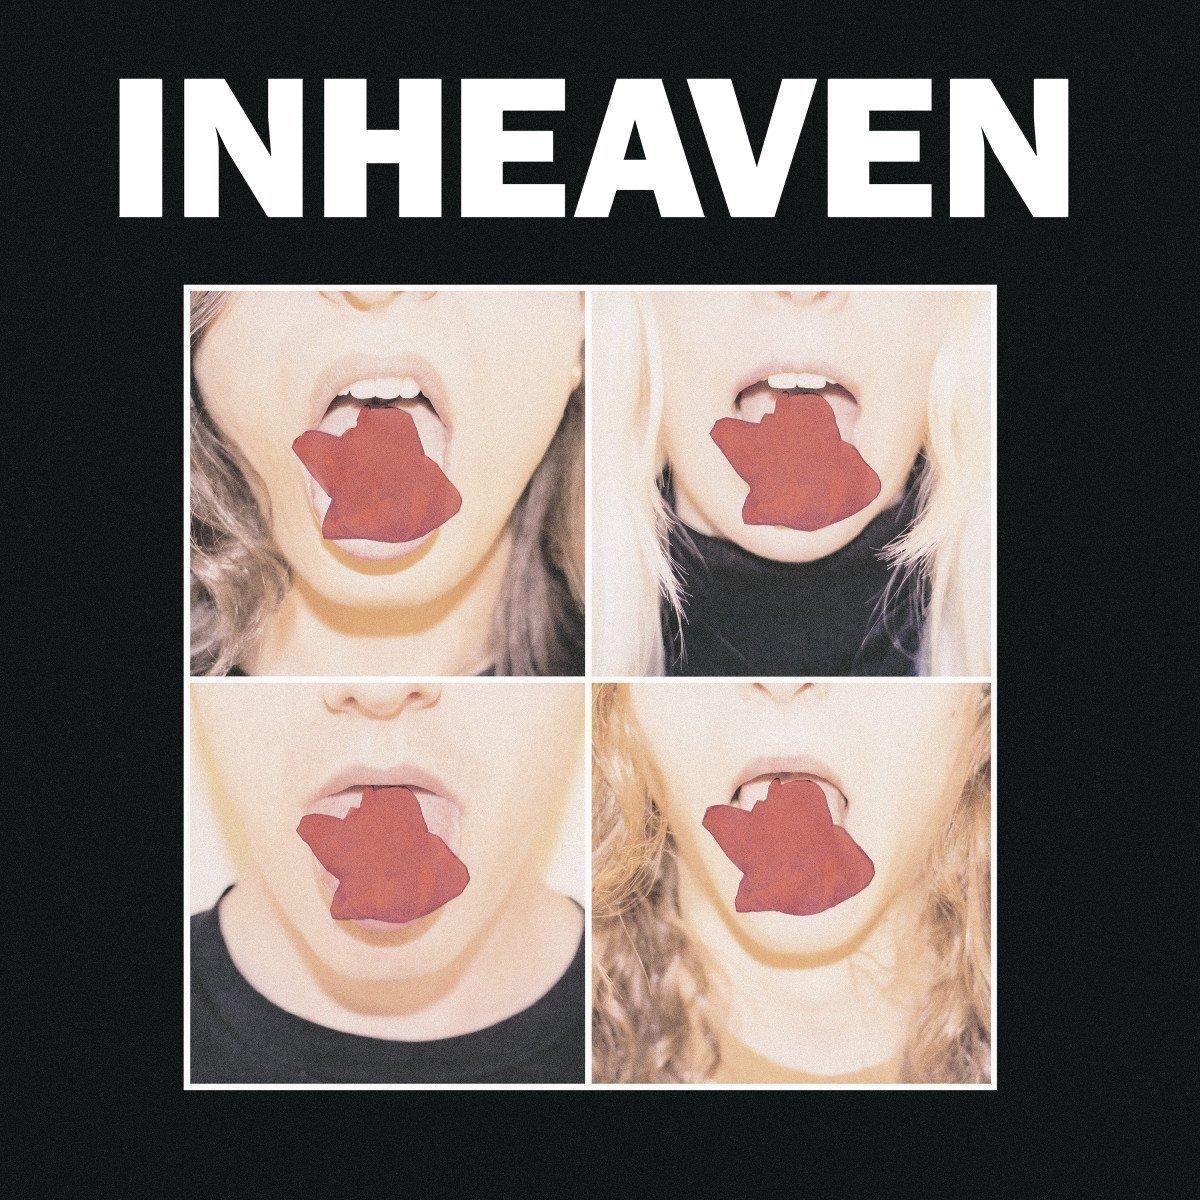 Old school: new bands like INHEAVEN routinely release their music on vinyl these days